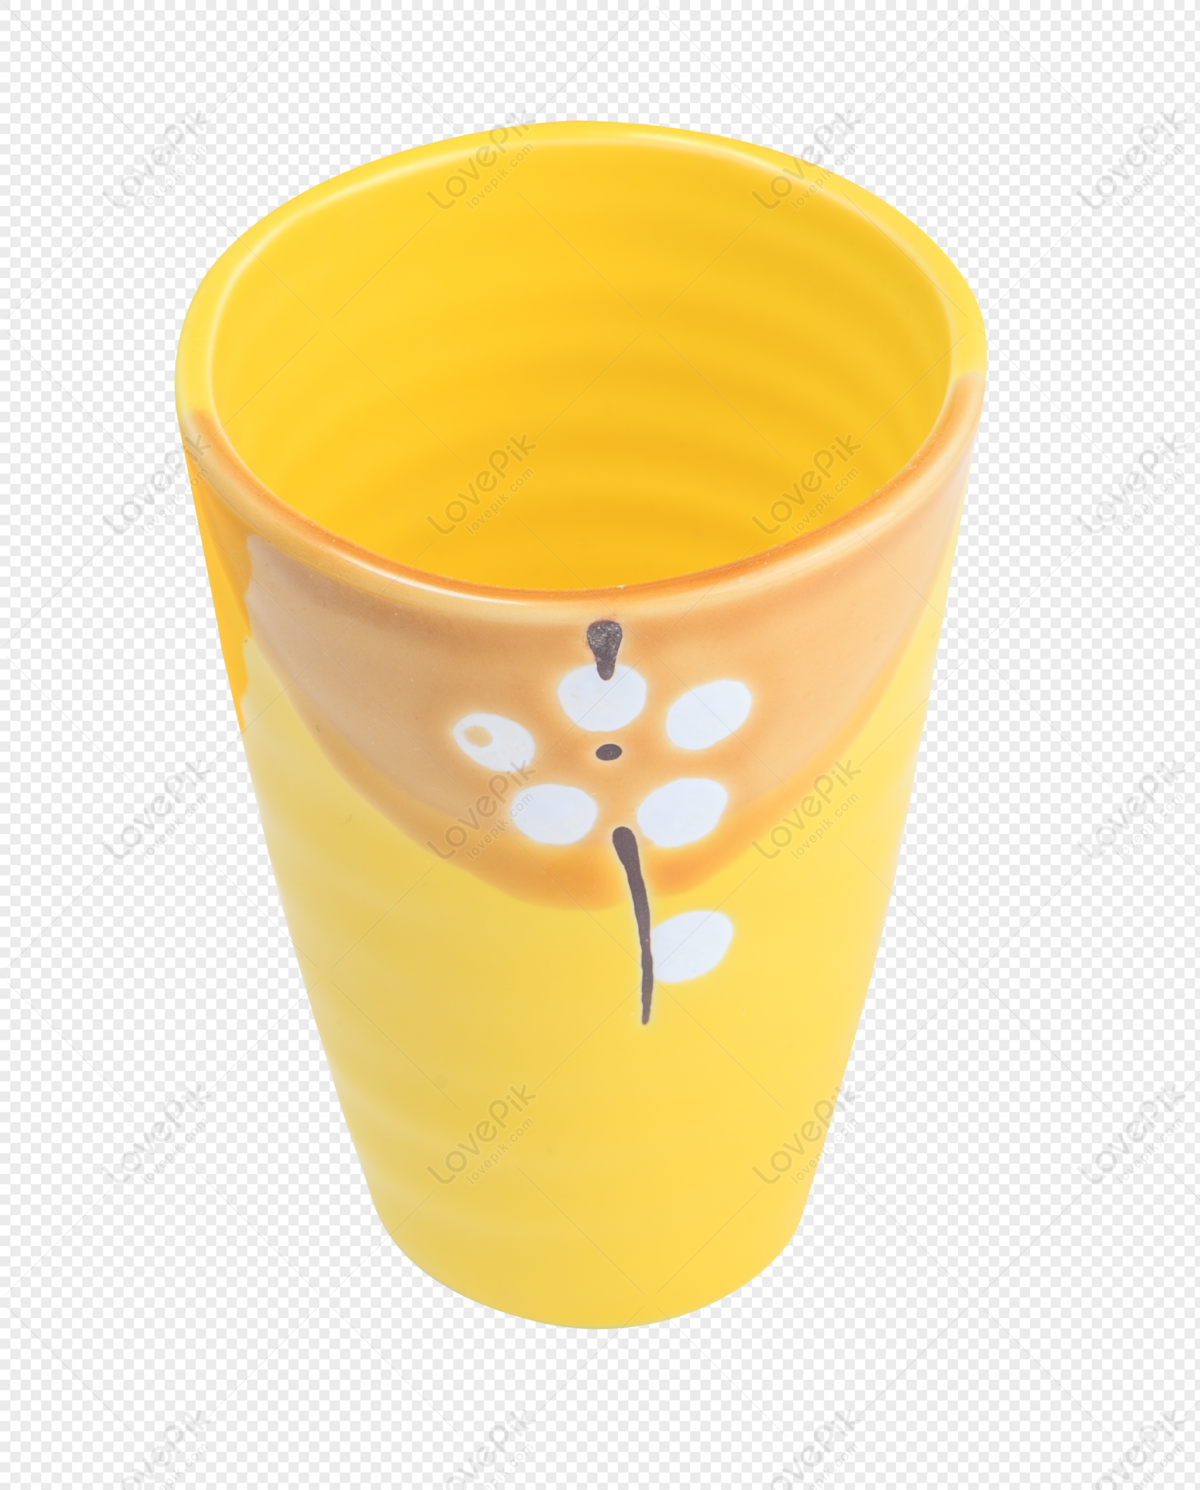 https://img.lovepik.com/free-png/20211116/lovepik-yellow-cup-png-image_400964279_wh1200.png